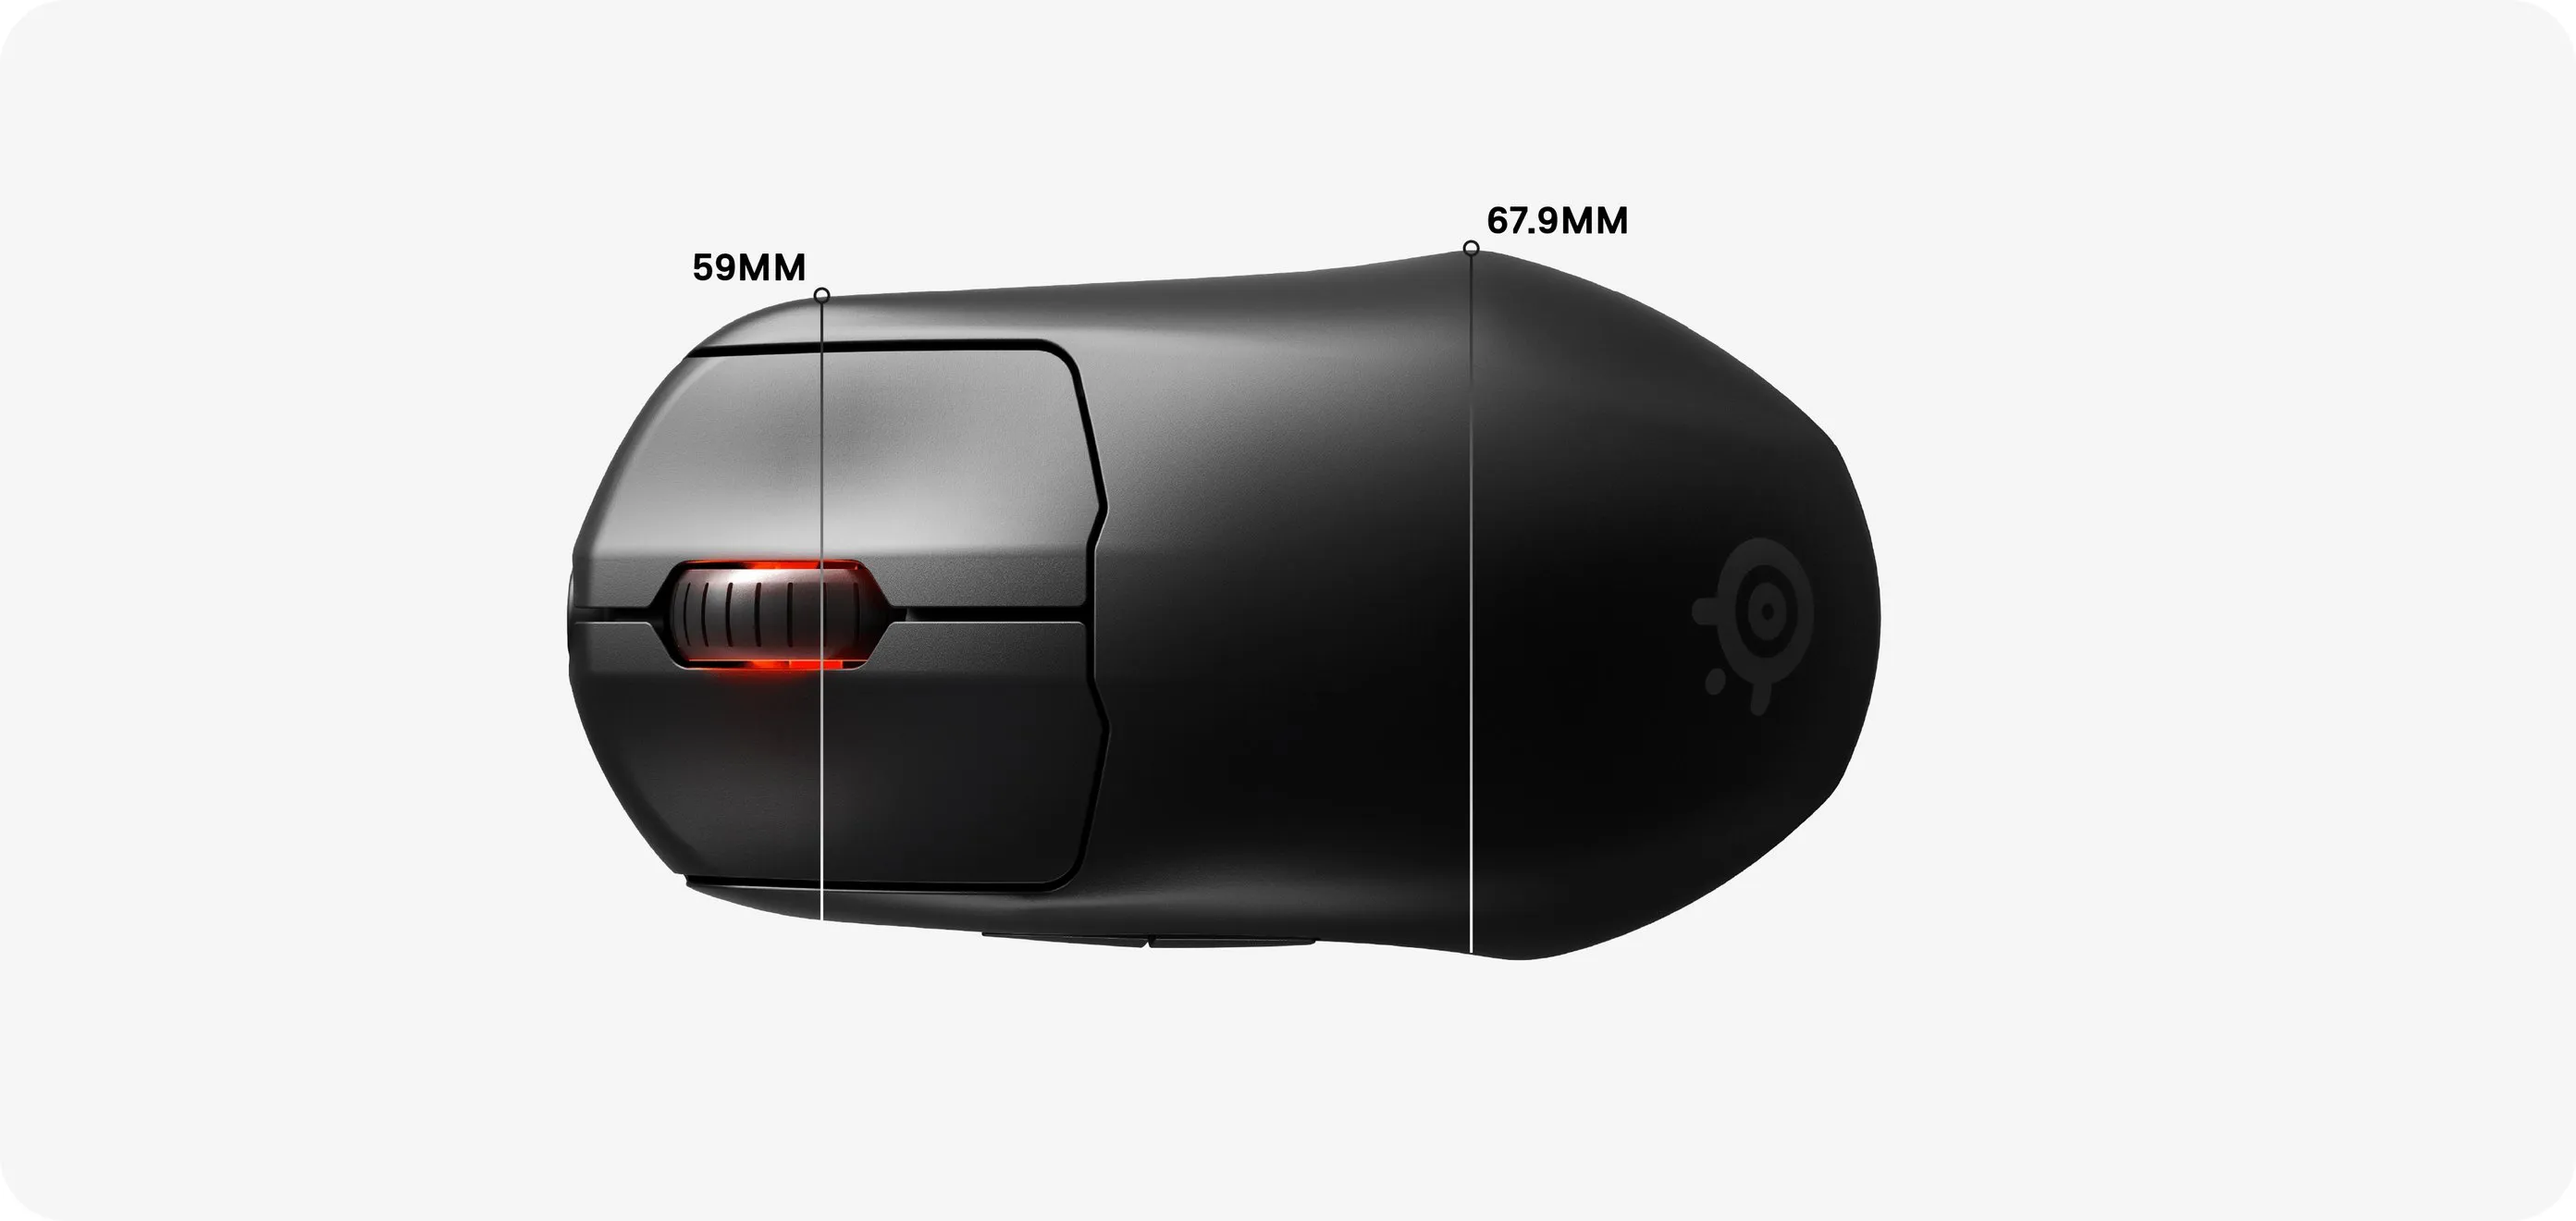 SteelSeries Prime Wireless gaming mouse Ǻ